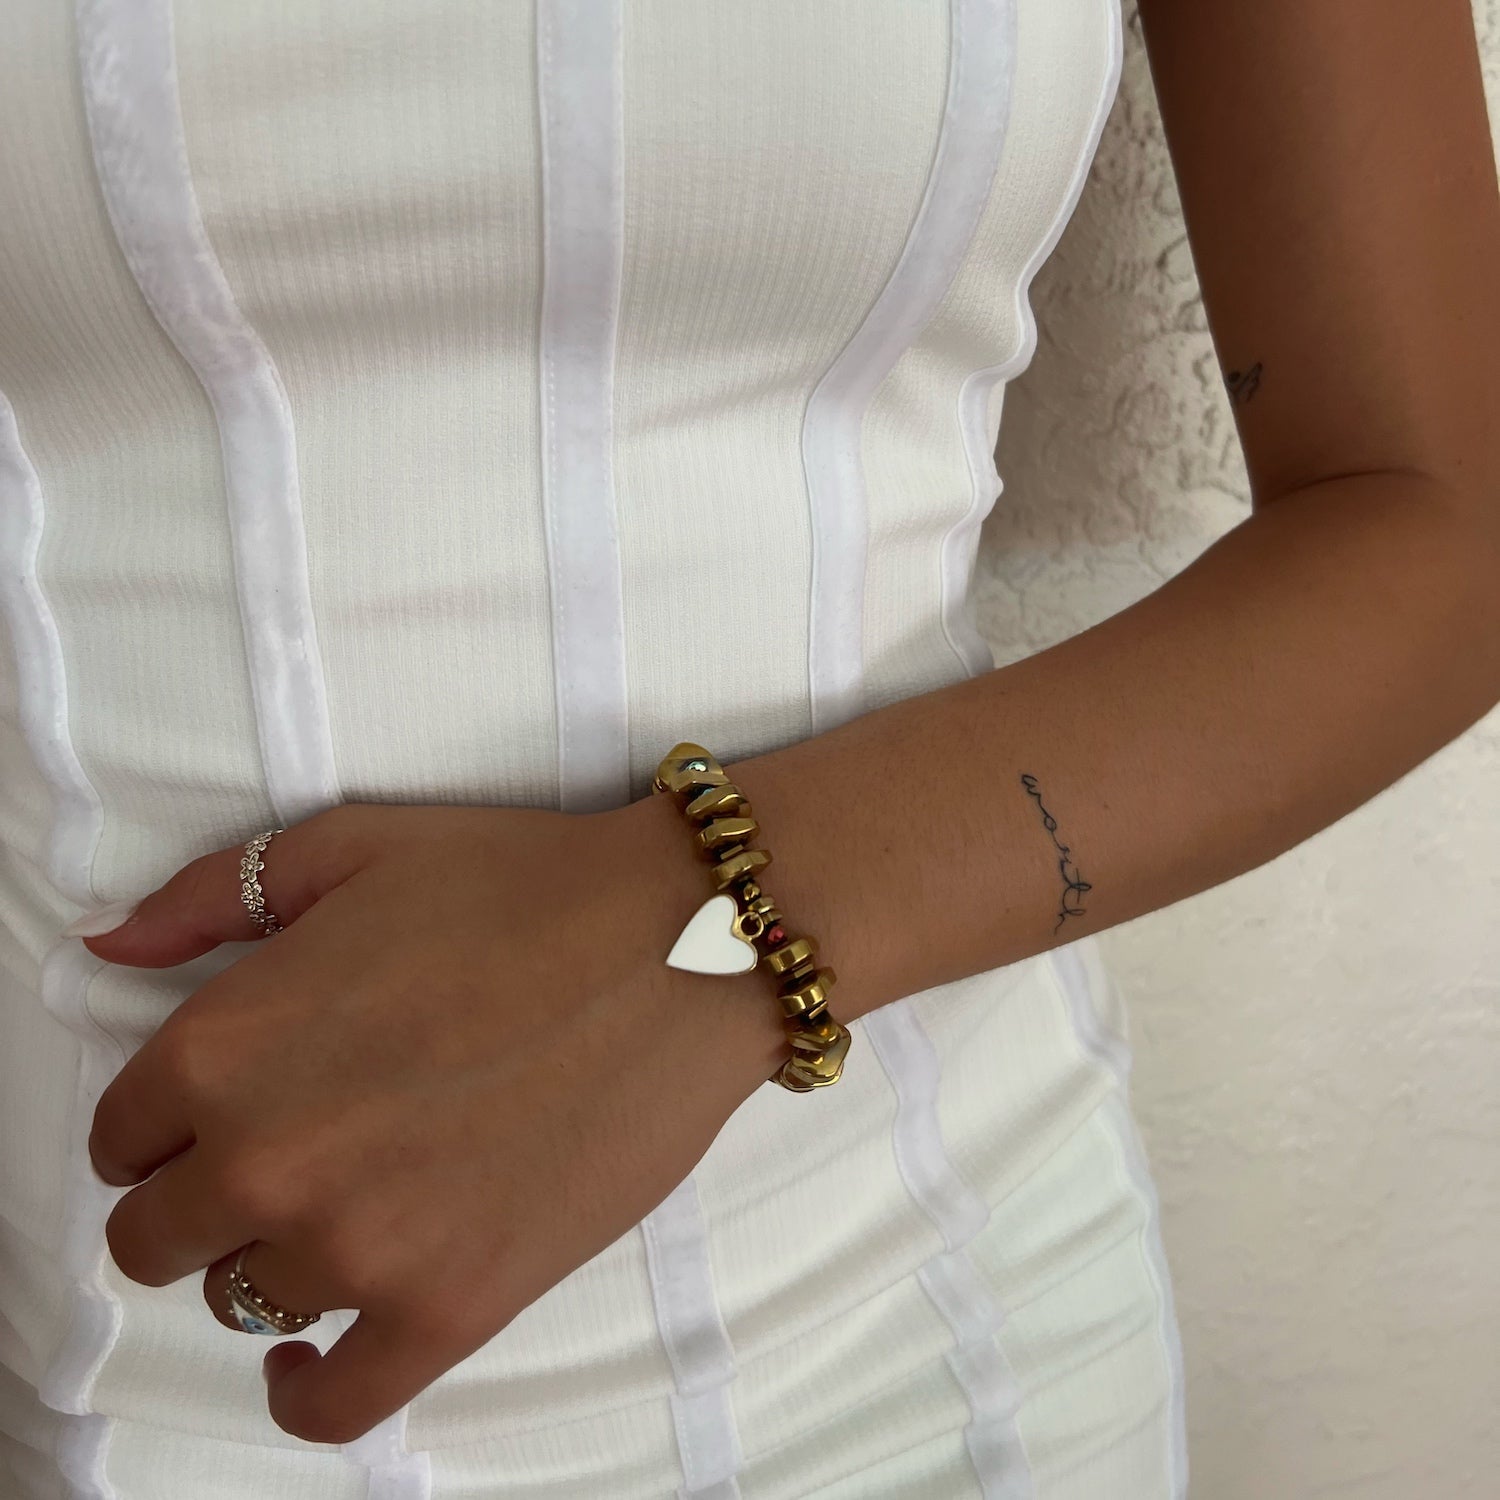 With the White Corazon Bracelet, the hand model exudes a sense of style and warmth, showcasing the charm&#39;s white enamel heart design.